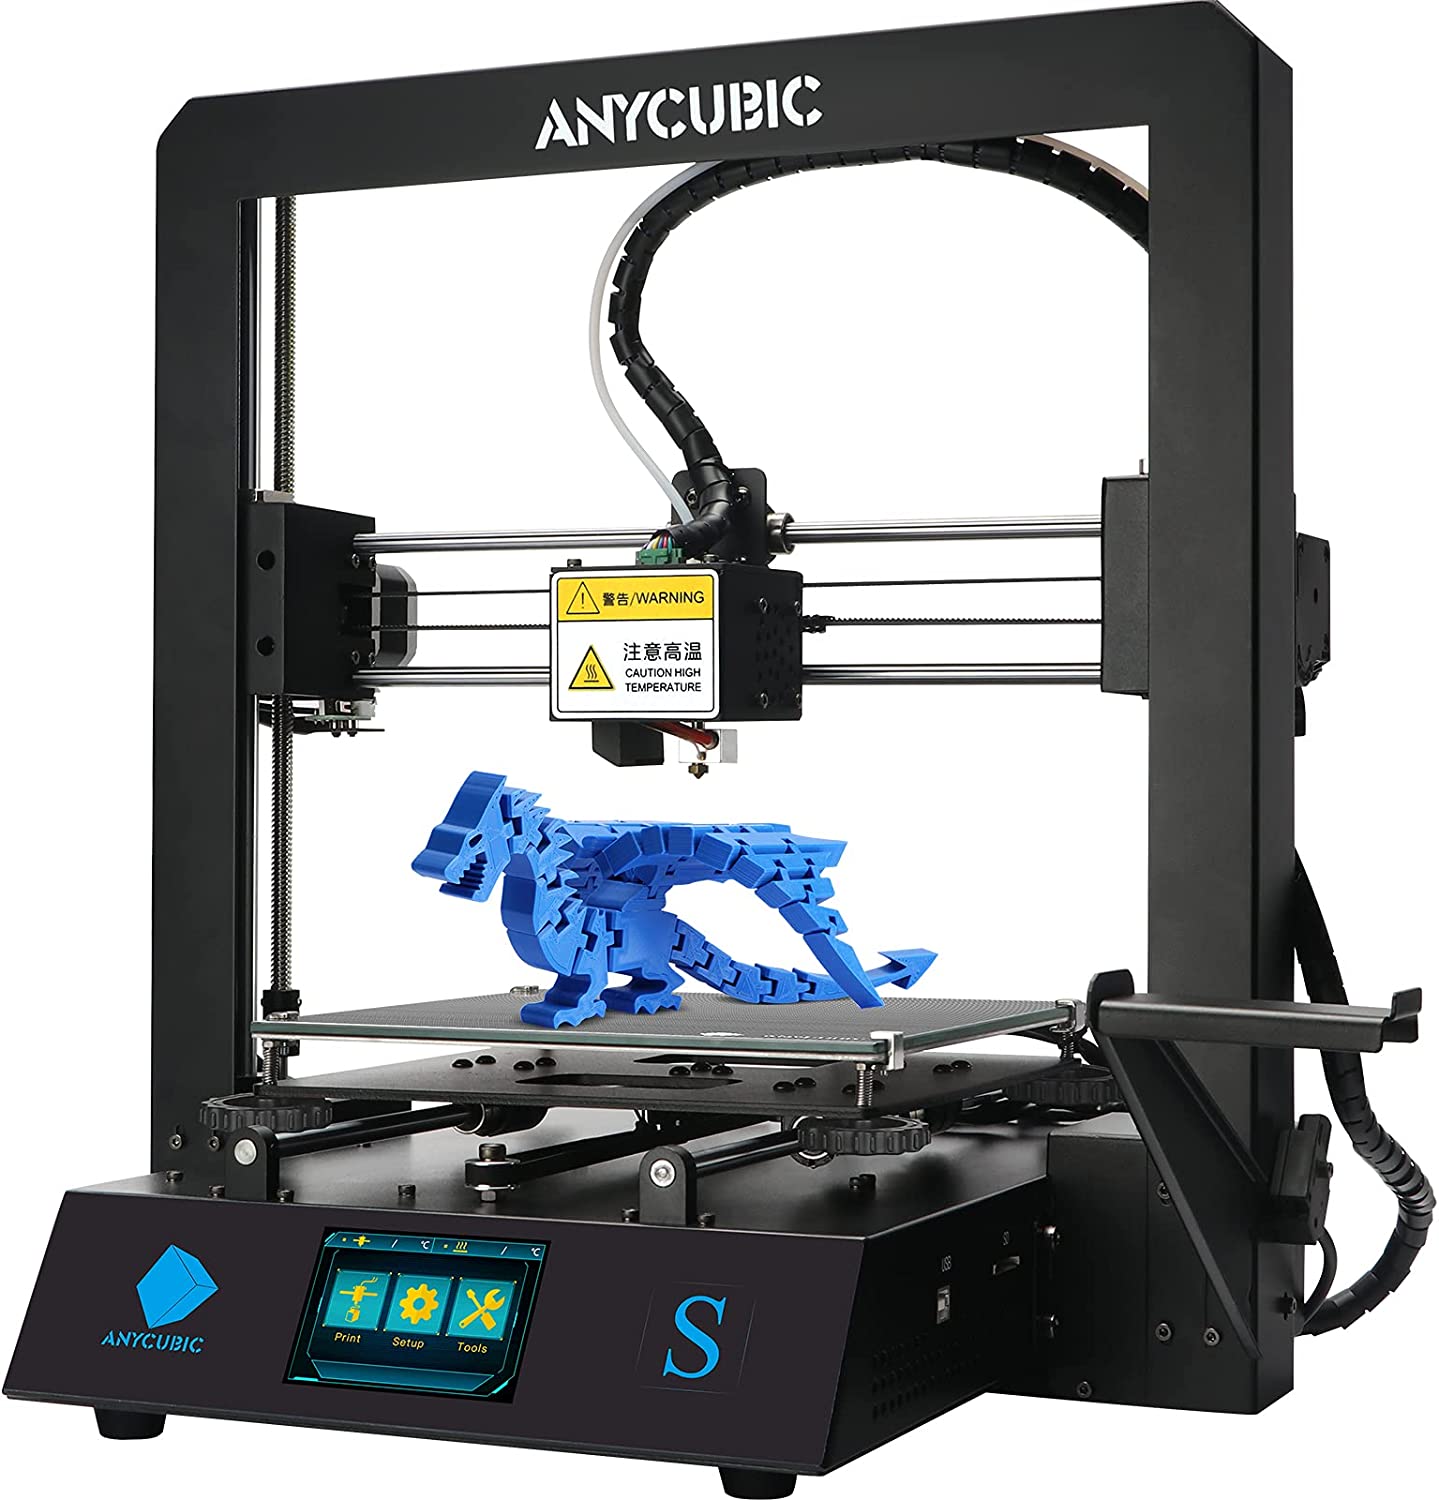 The best 3d printer for under $300 in 2022